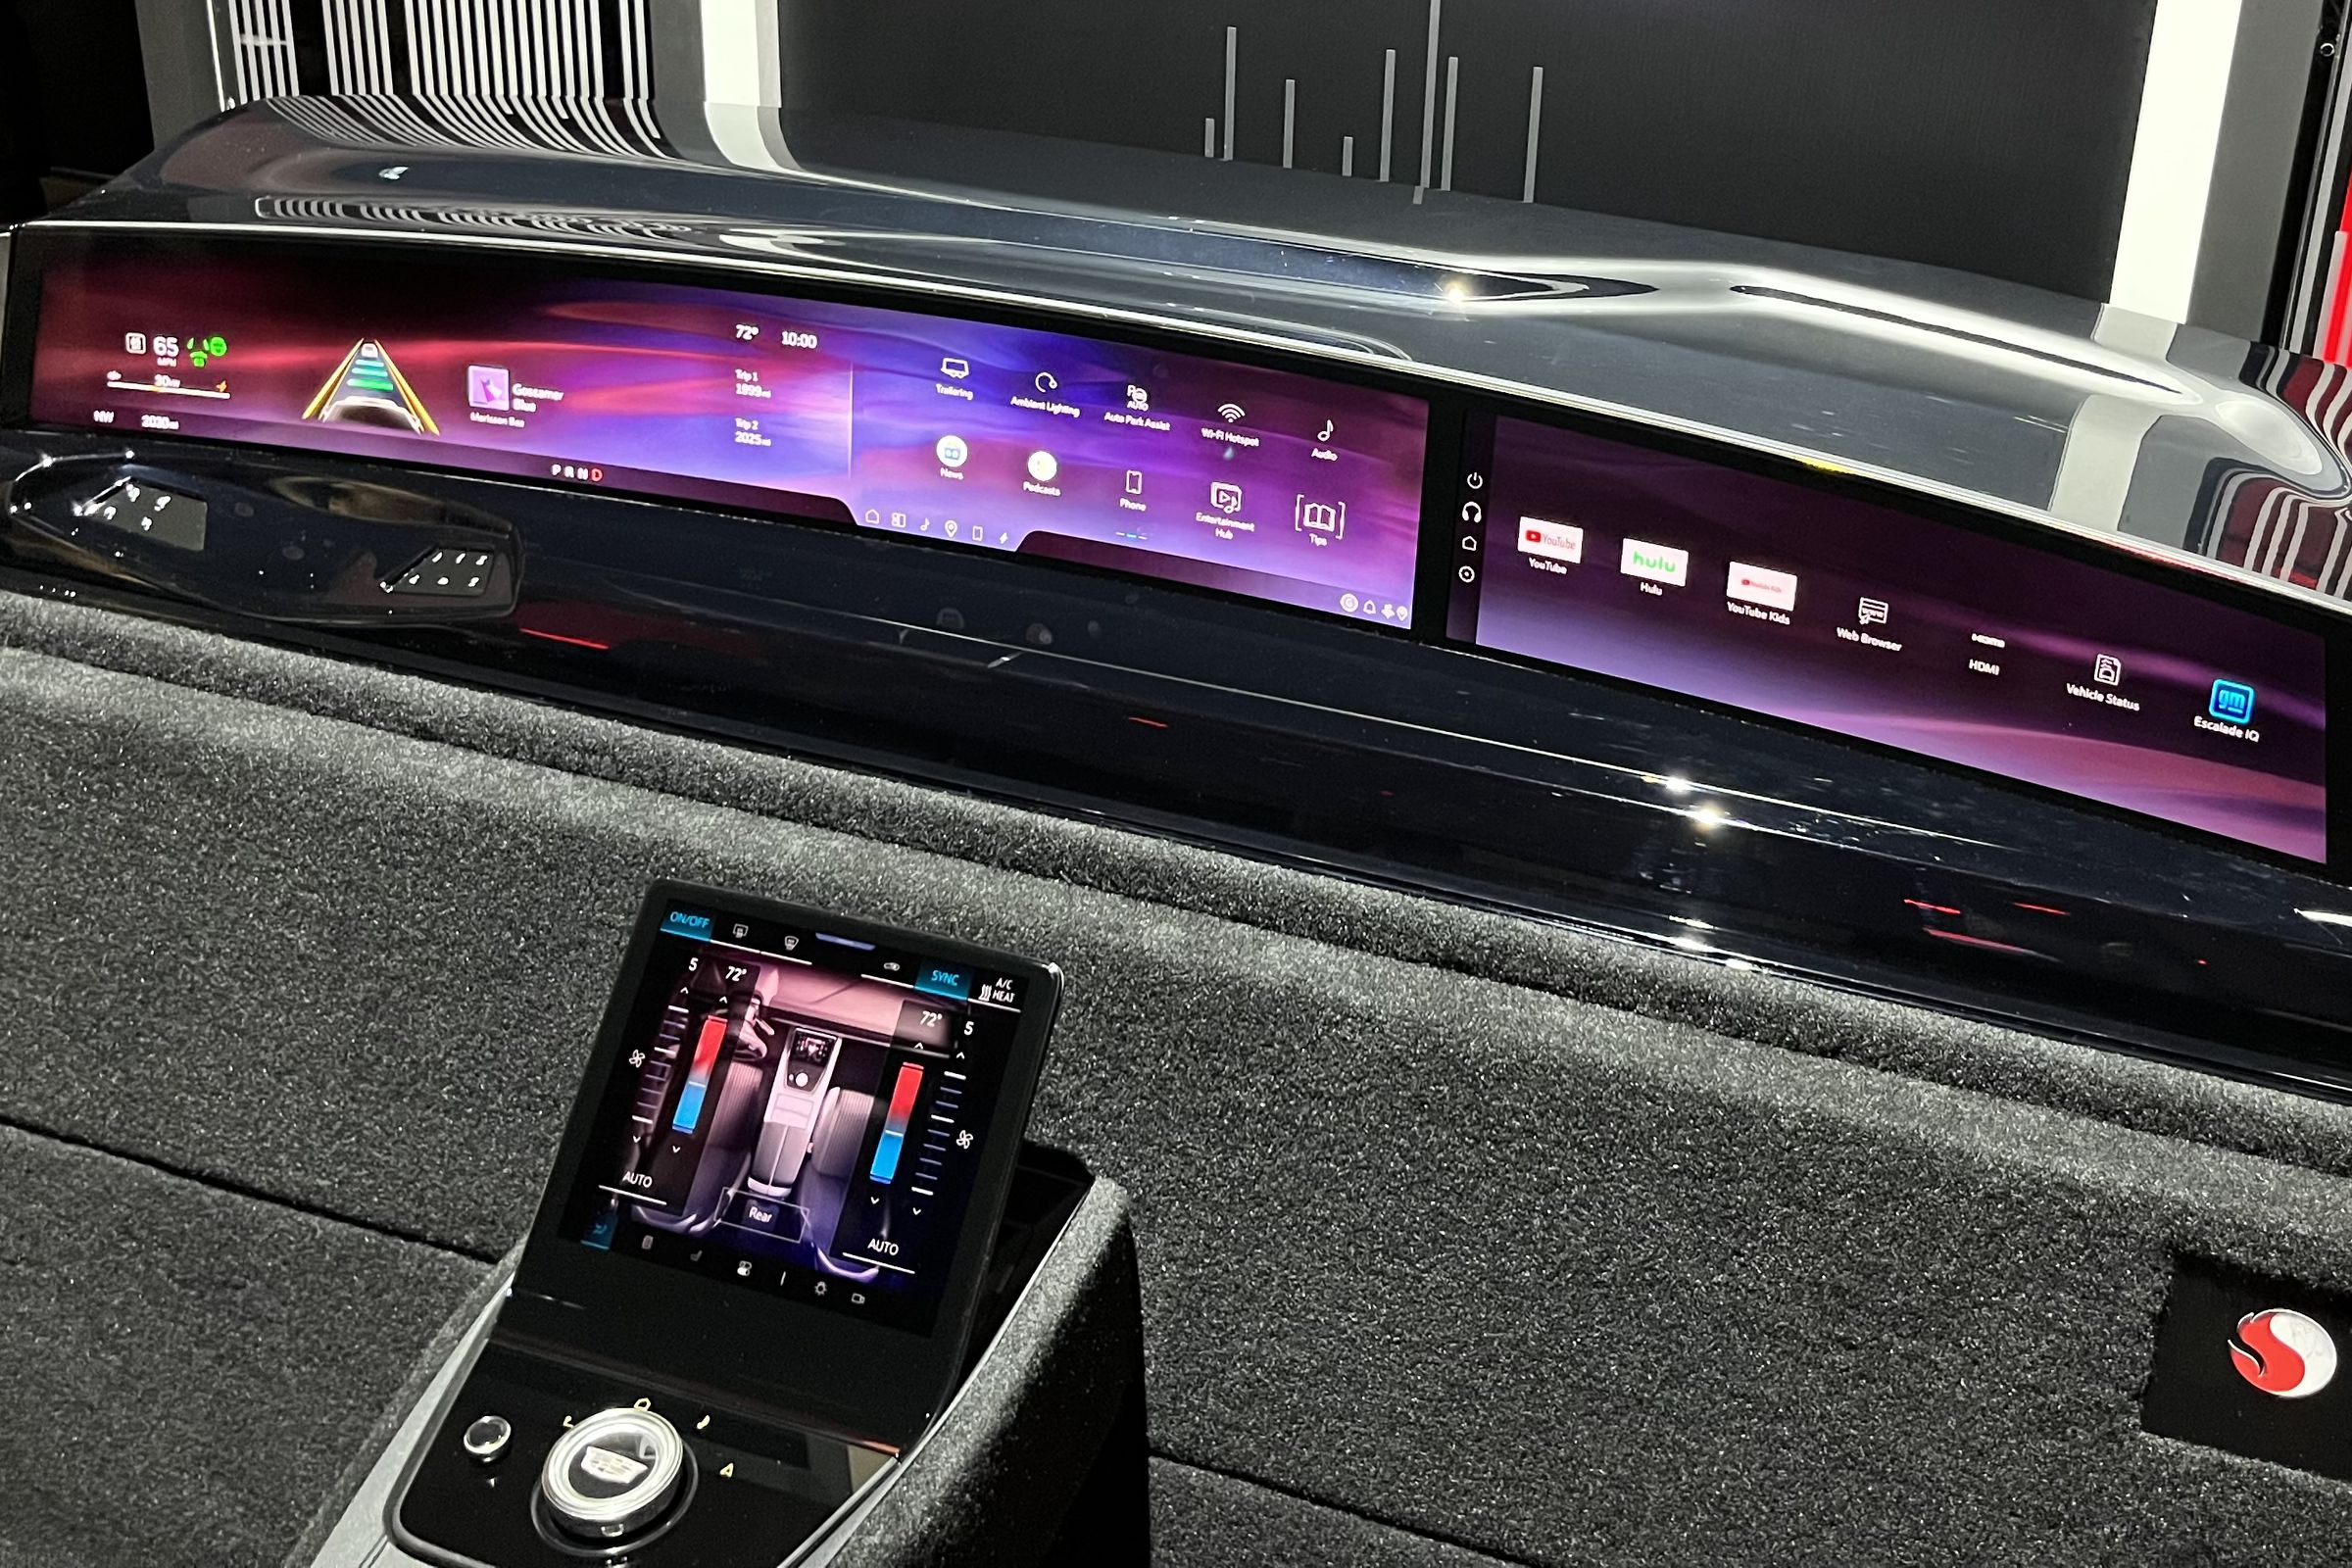 Kiosk showing just the panoramic display dashboard that goes inside the Escalade IQ along with a driver control screen panel under it